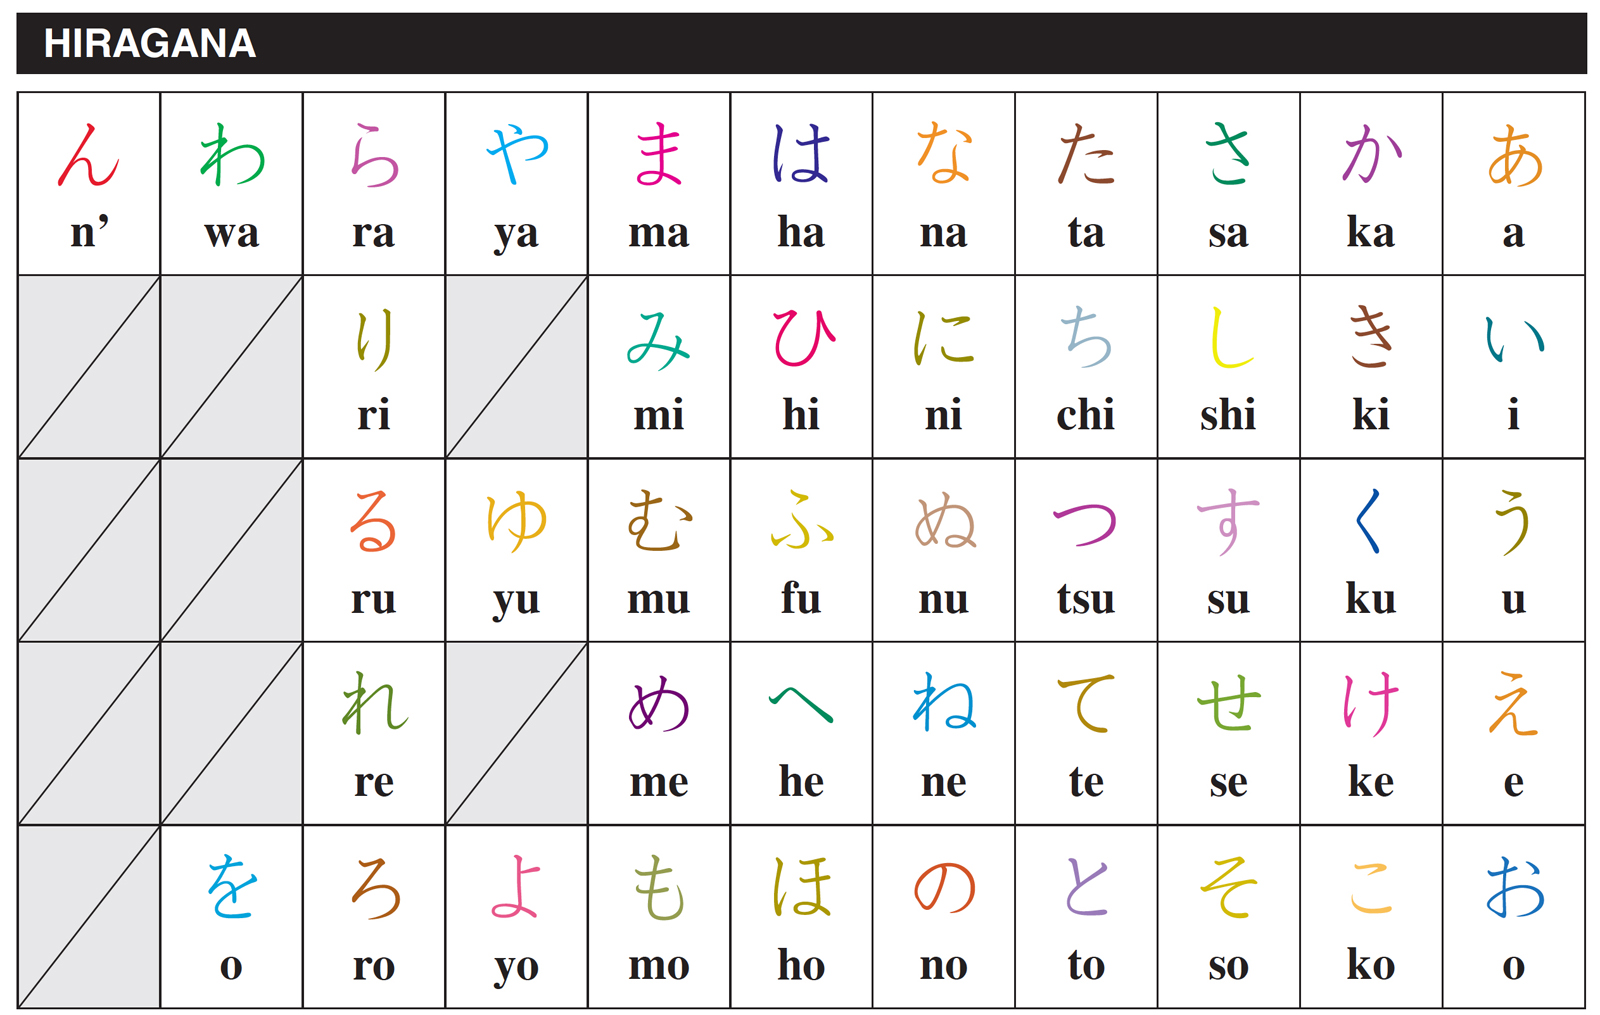 My First Japanese Kanji Book Learning kanji the fun and easy way Downloadable MP3 Audio Included - photo 3